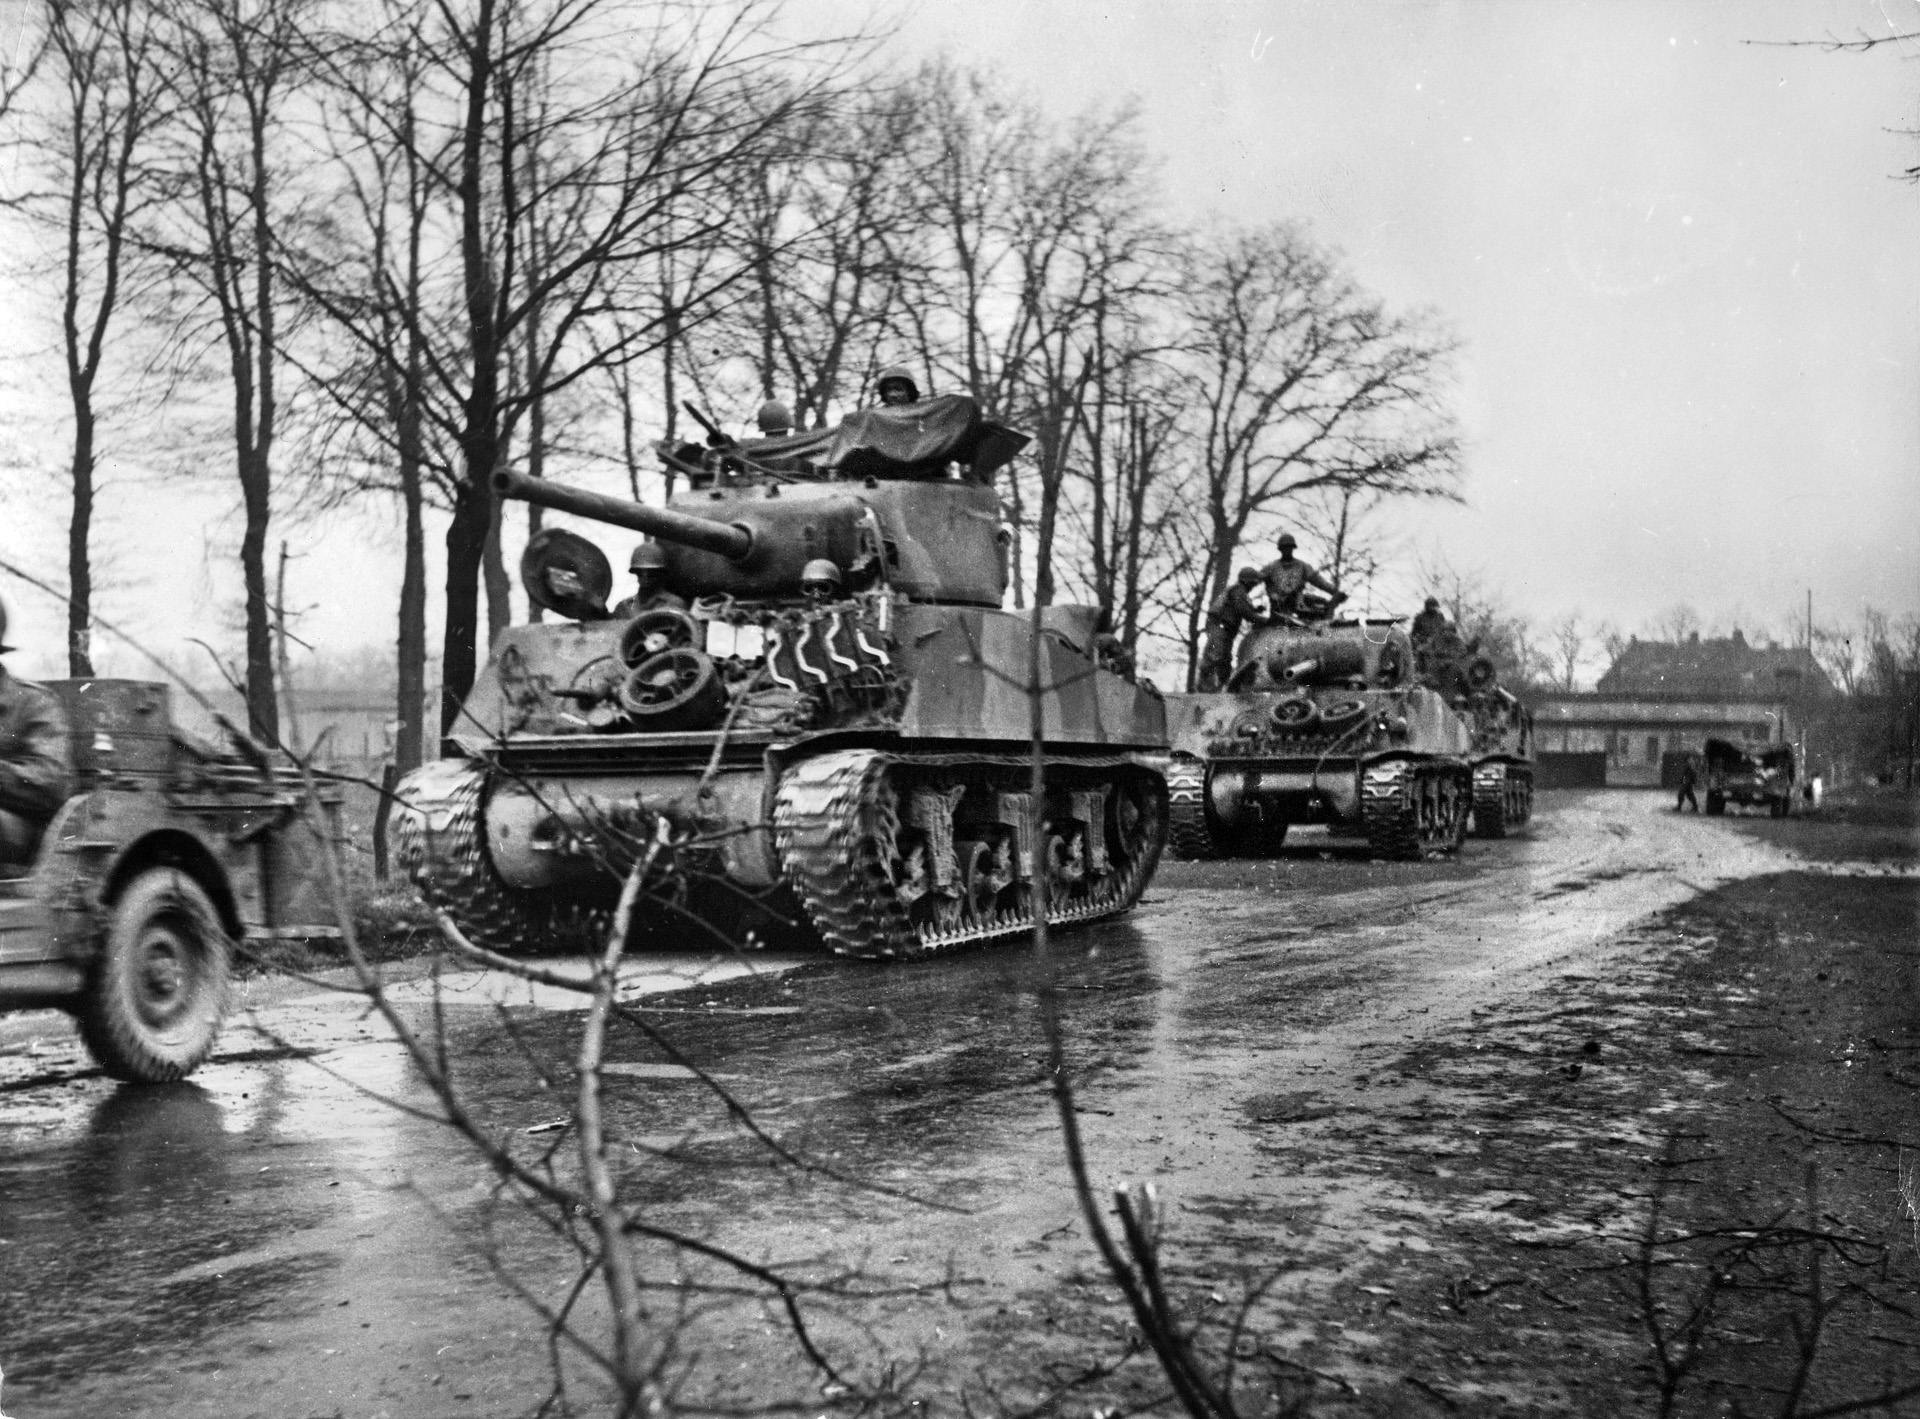 Three Sherman tanks of the African American 784th Tank Battalion line up on a road outside a village before going into action, December 1943. The 784th supported the 35th Infantry Division during Operation Grenade and helped to capture several towns in late February 1945.